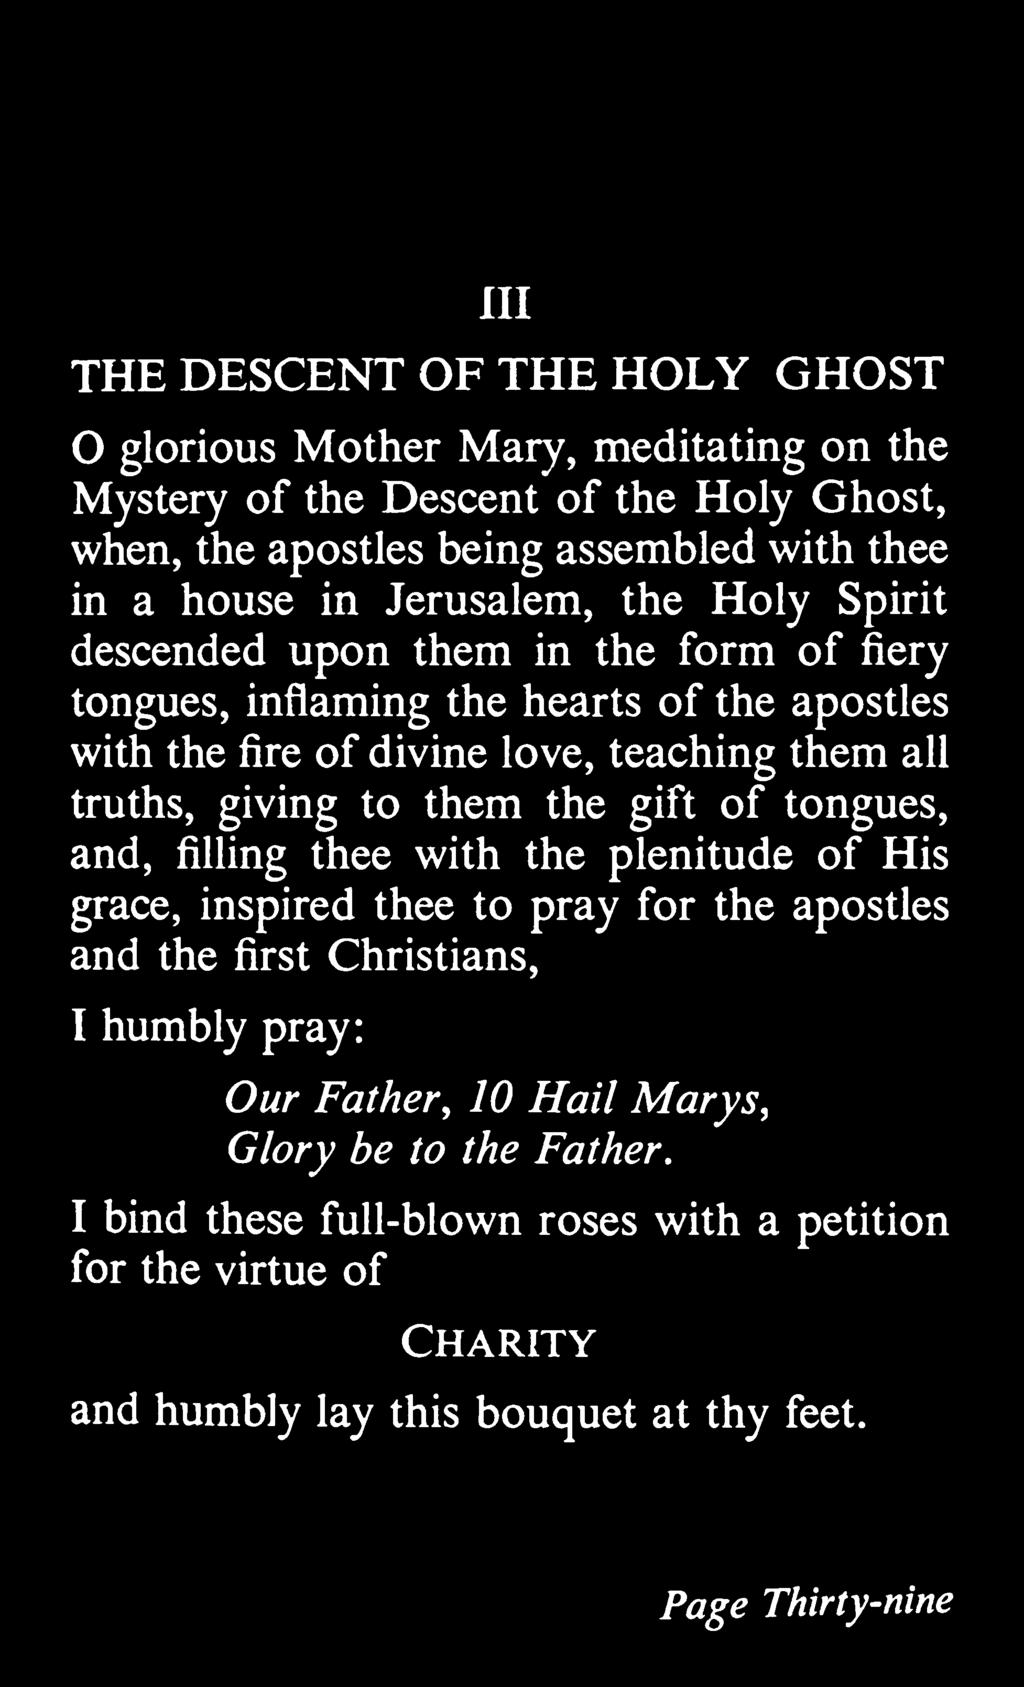 giving to them the gift of tongues, and, filling thee with the plenitude of His grace, inspired thee to pray for the apostles and the first Christians, 1 humbly pray: Our